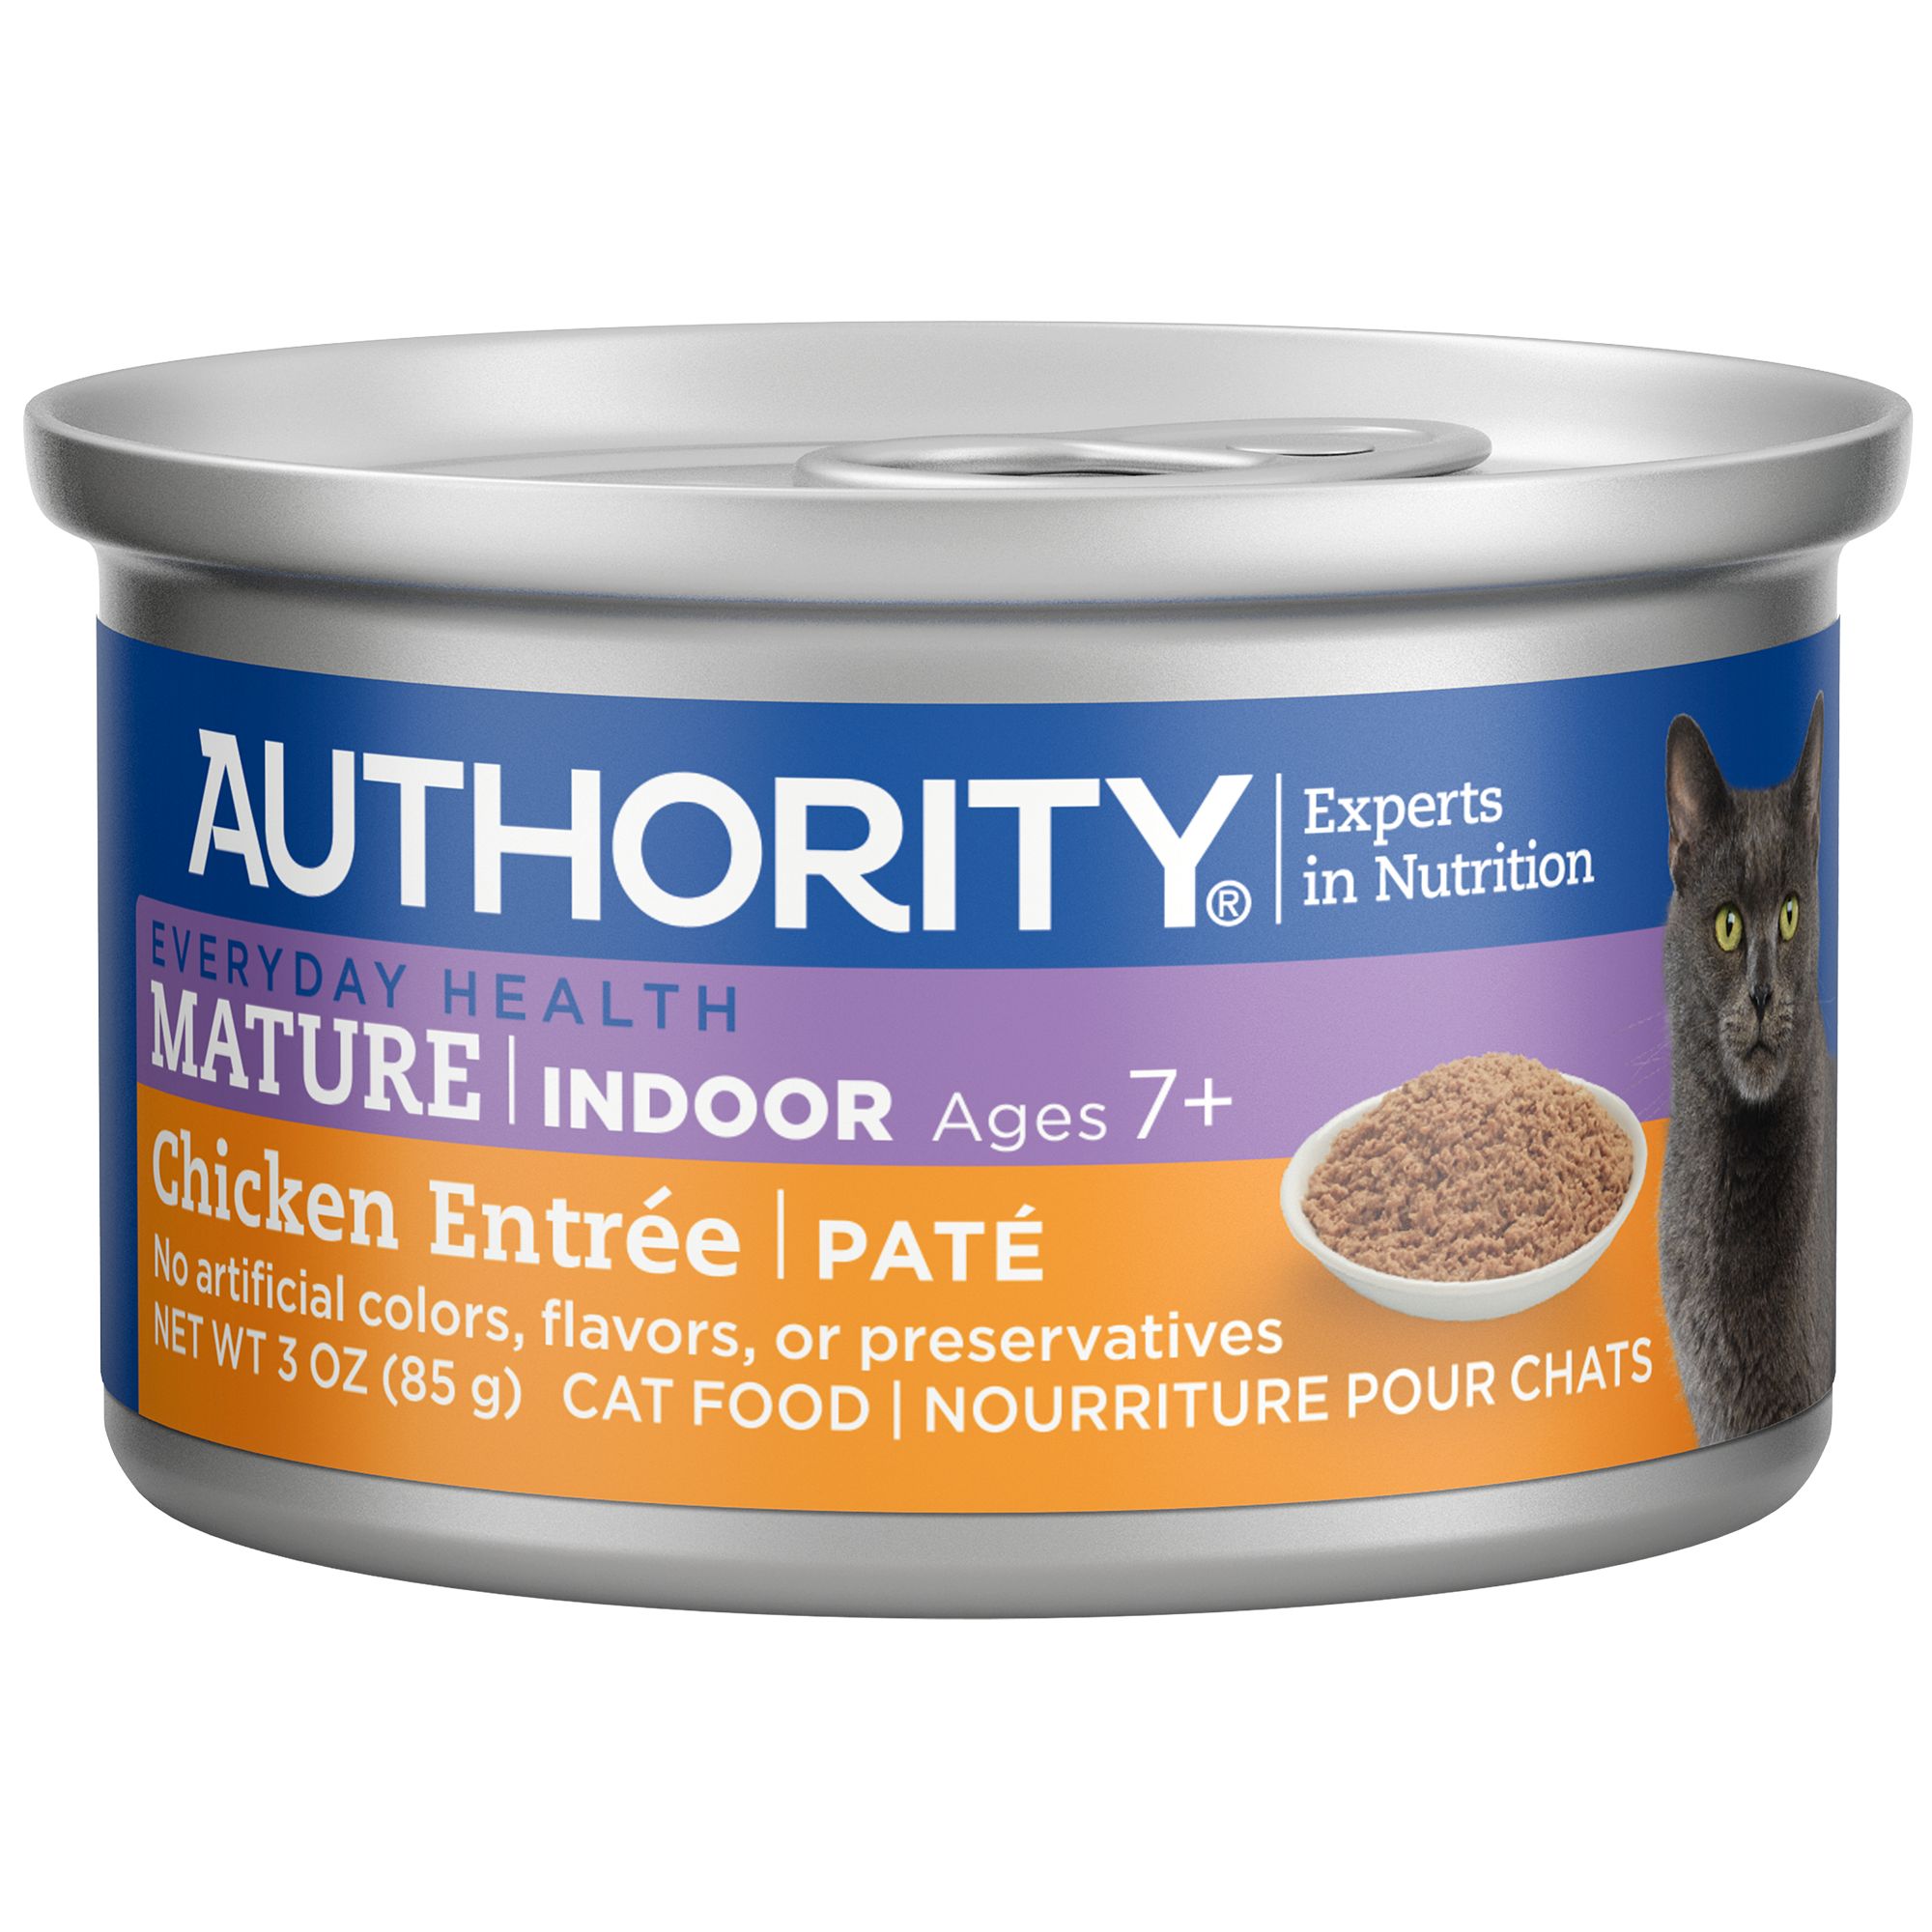 Authority Mature Indoor Pate Entree 